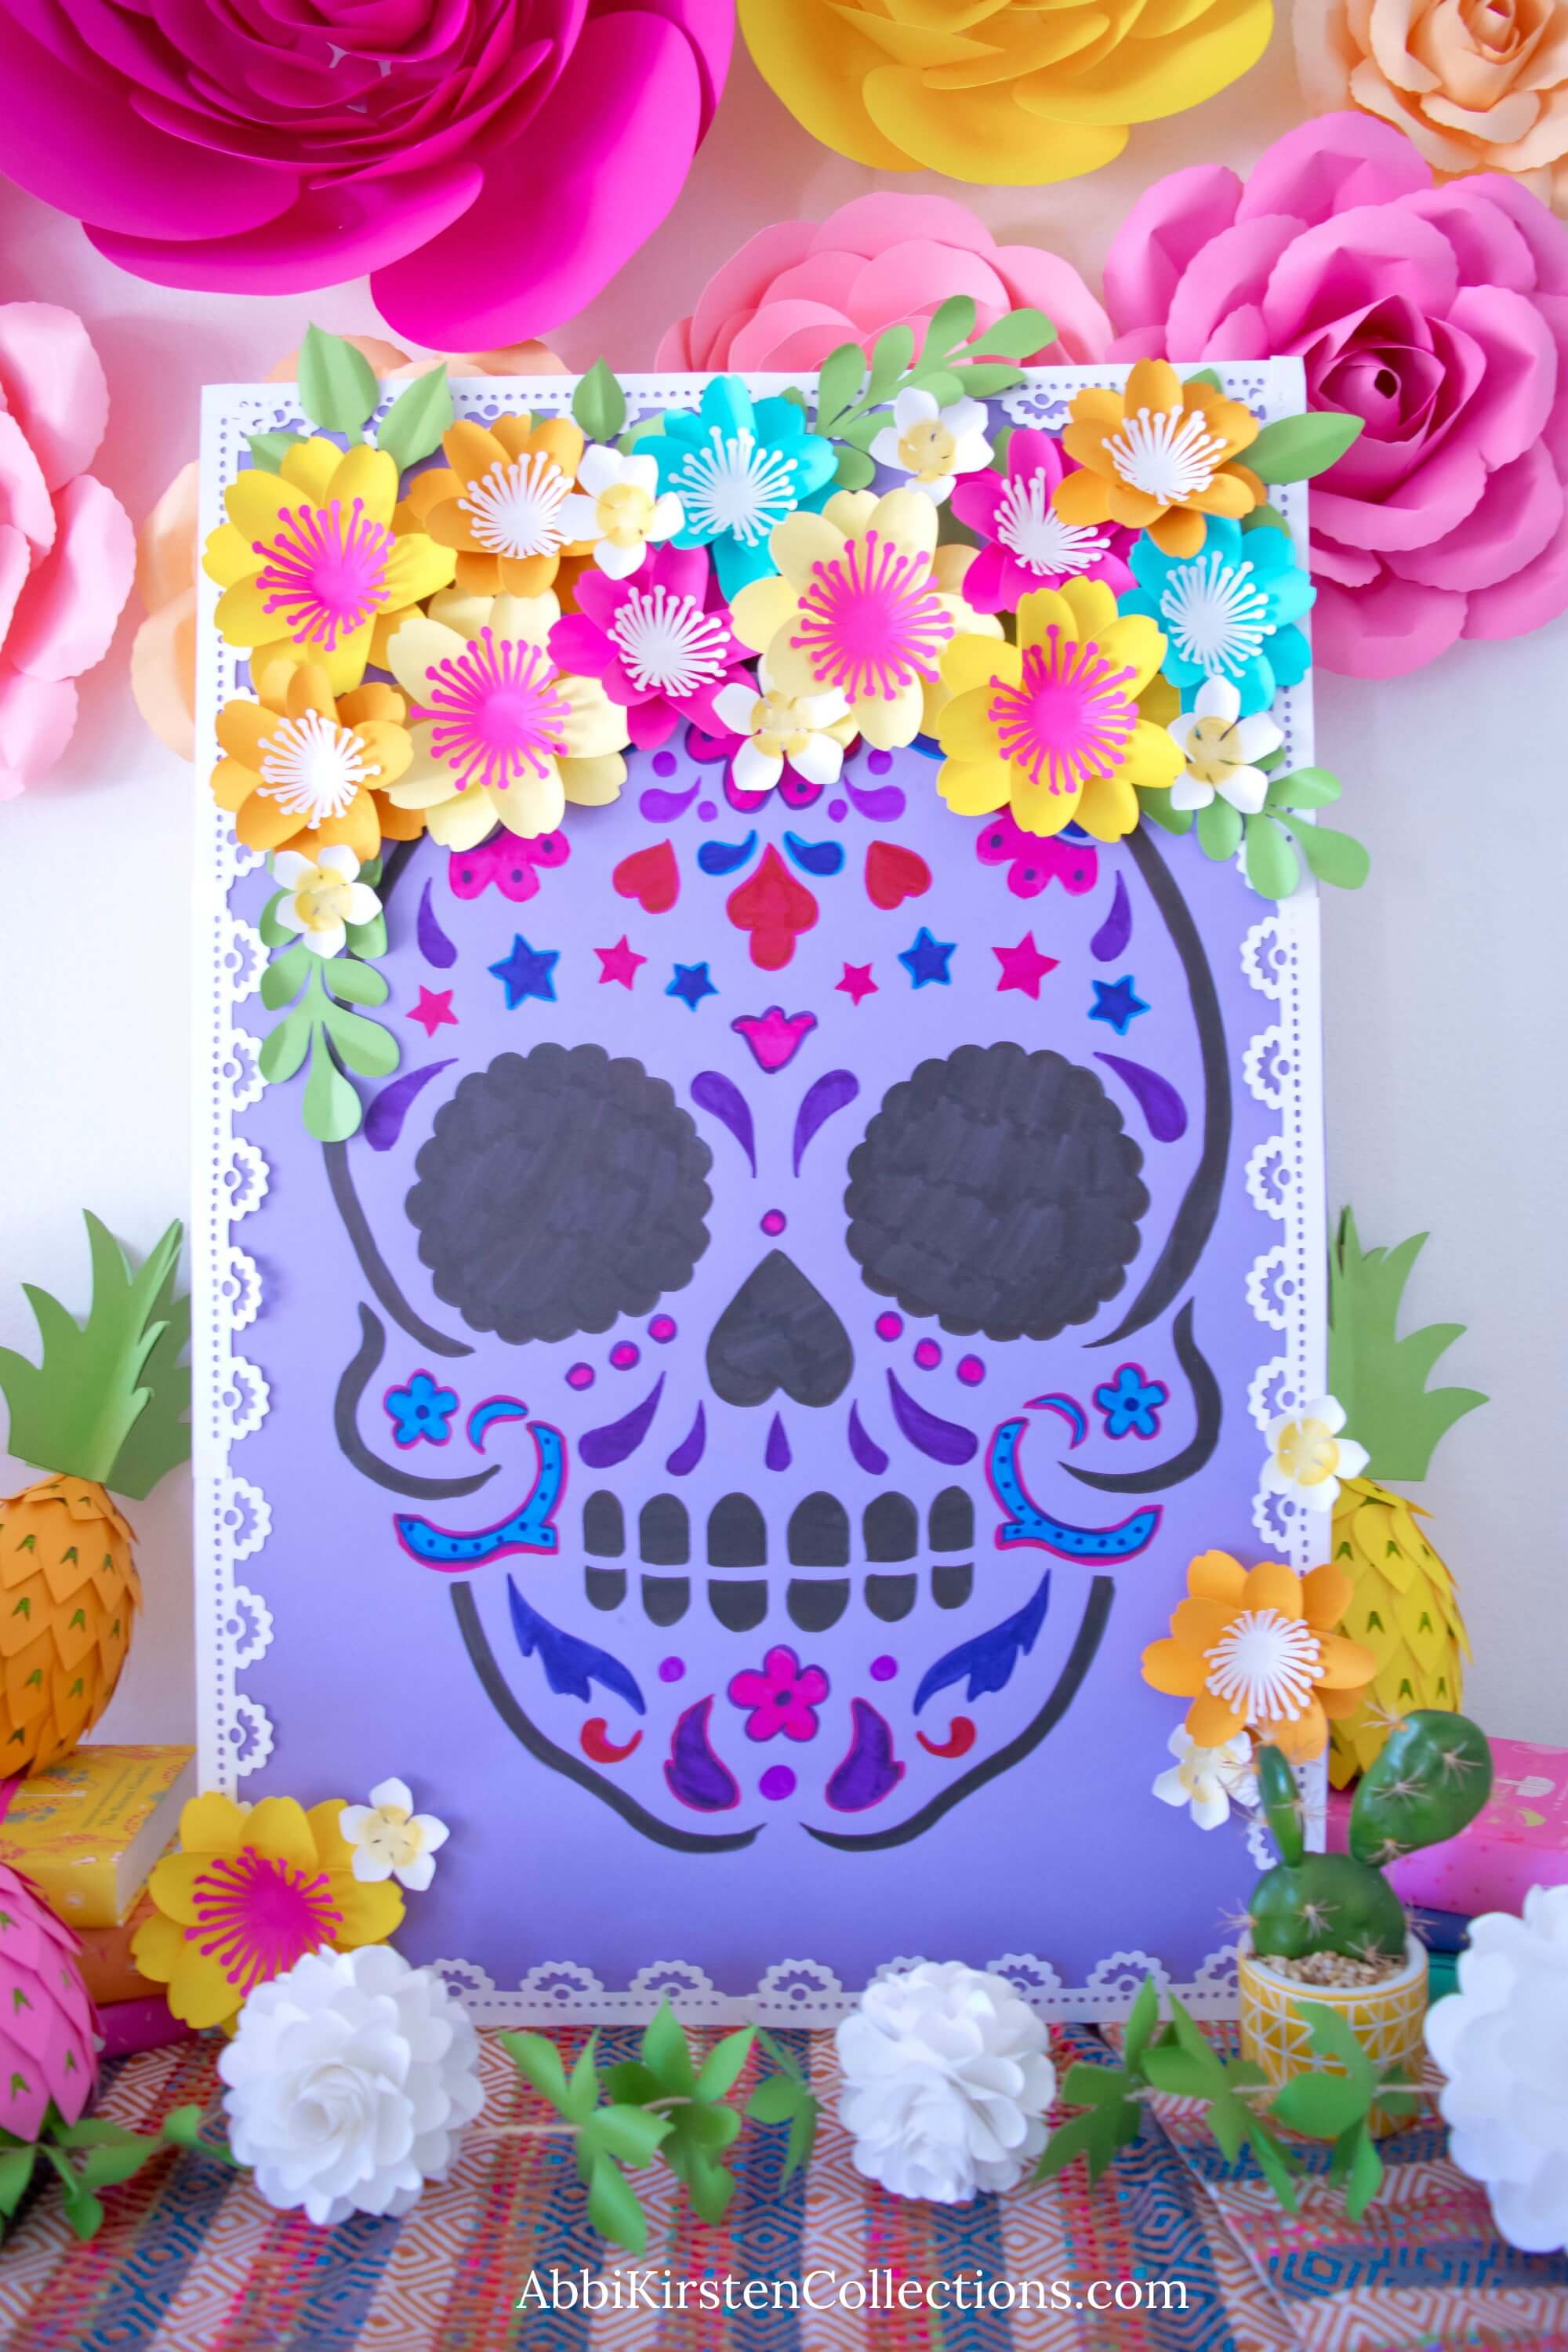 Day of the Dead Sugar Skull Craft and Tradition